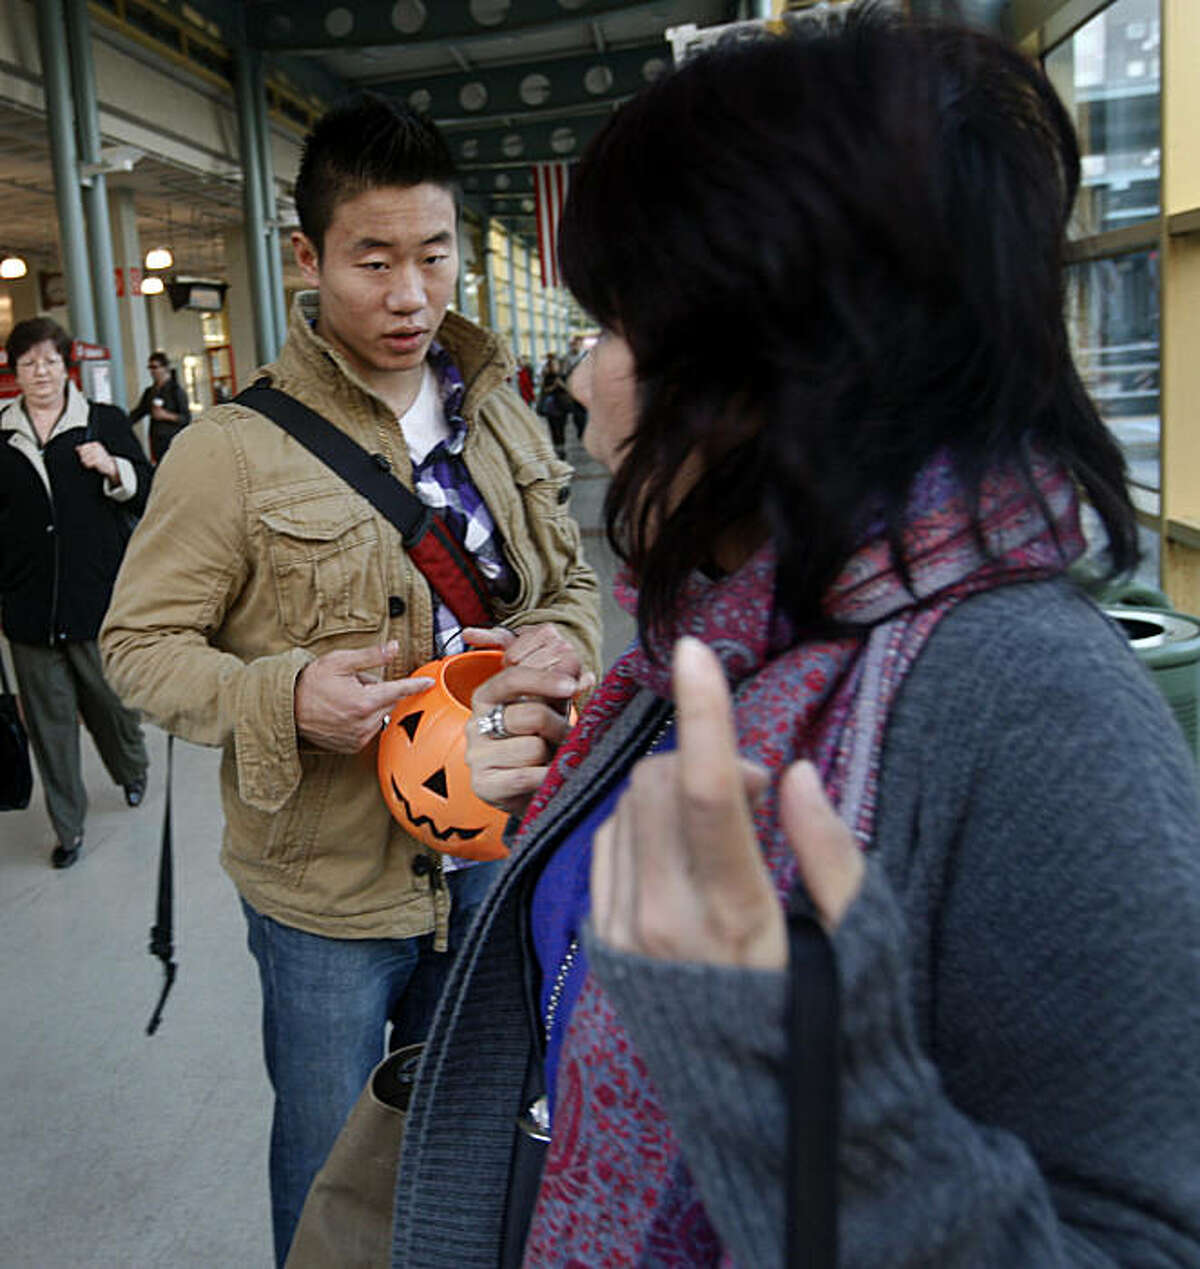 A woman (right) rejects Jason Shen's offer of free candy at the Caltrain Station in San Francisco, Calif., on Thursday, Nov. 4, 2010. Shen is taking part in a practice called Rejection Therapy, which requires participants to be rejected by someone at least once a day to get over their fear of rejection.